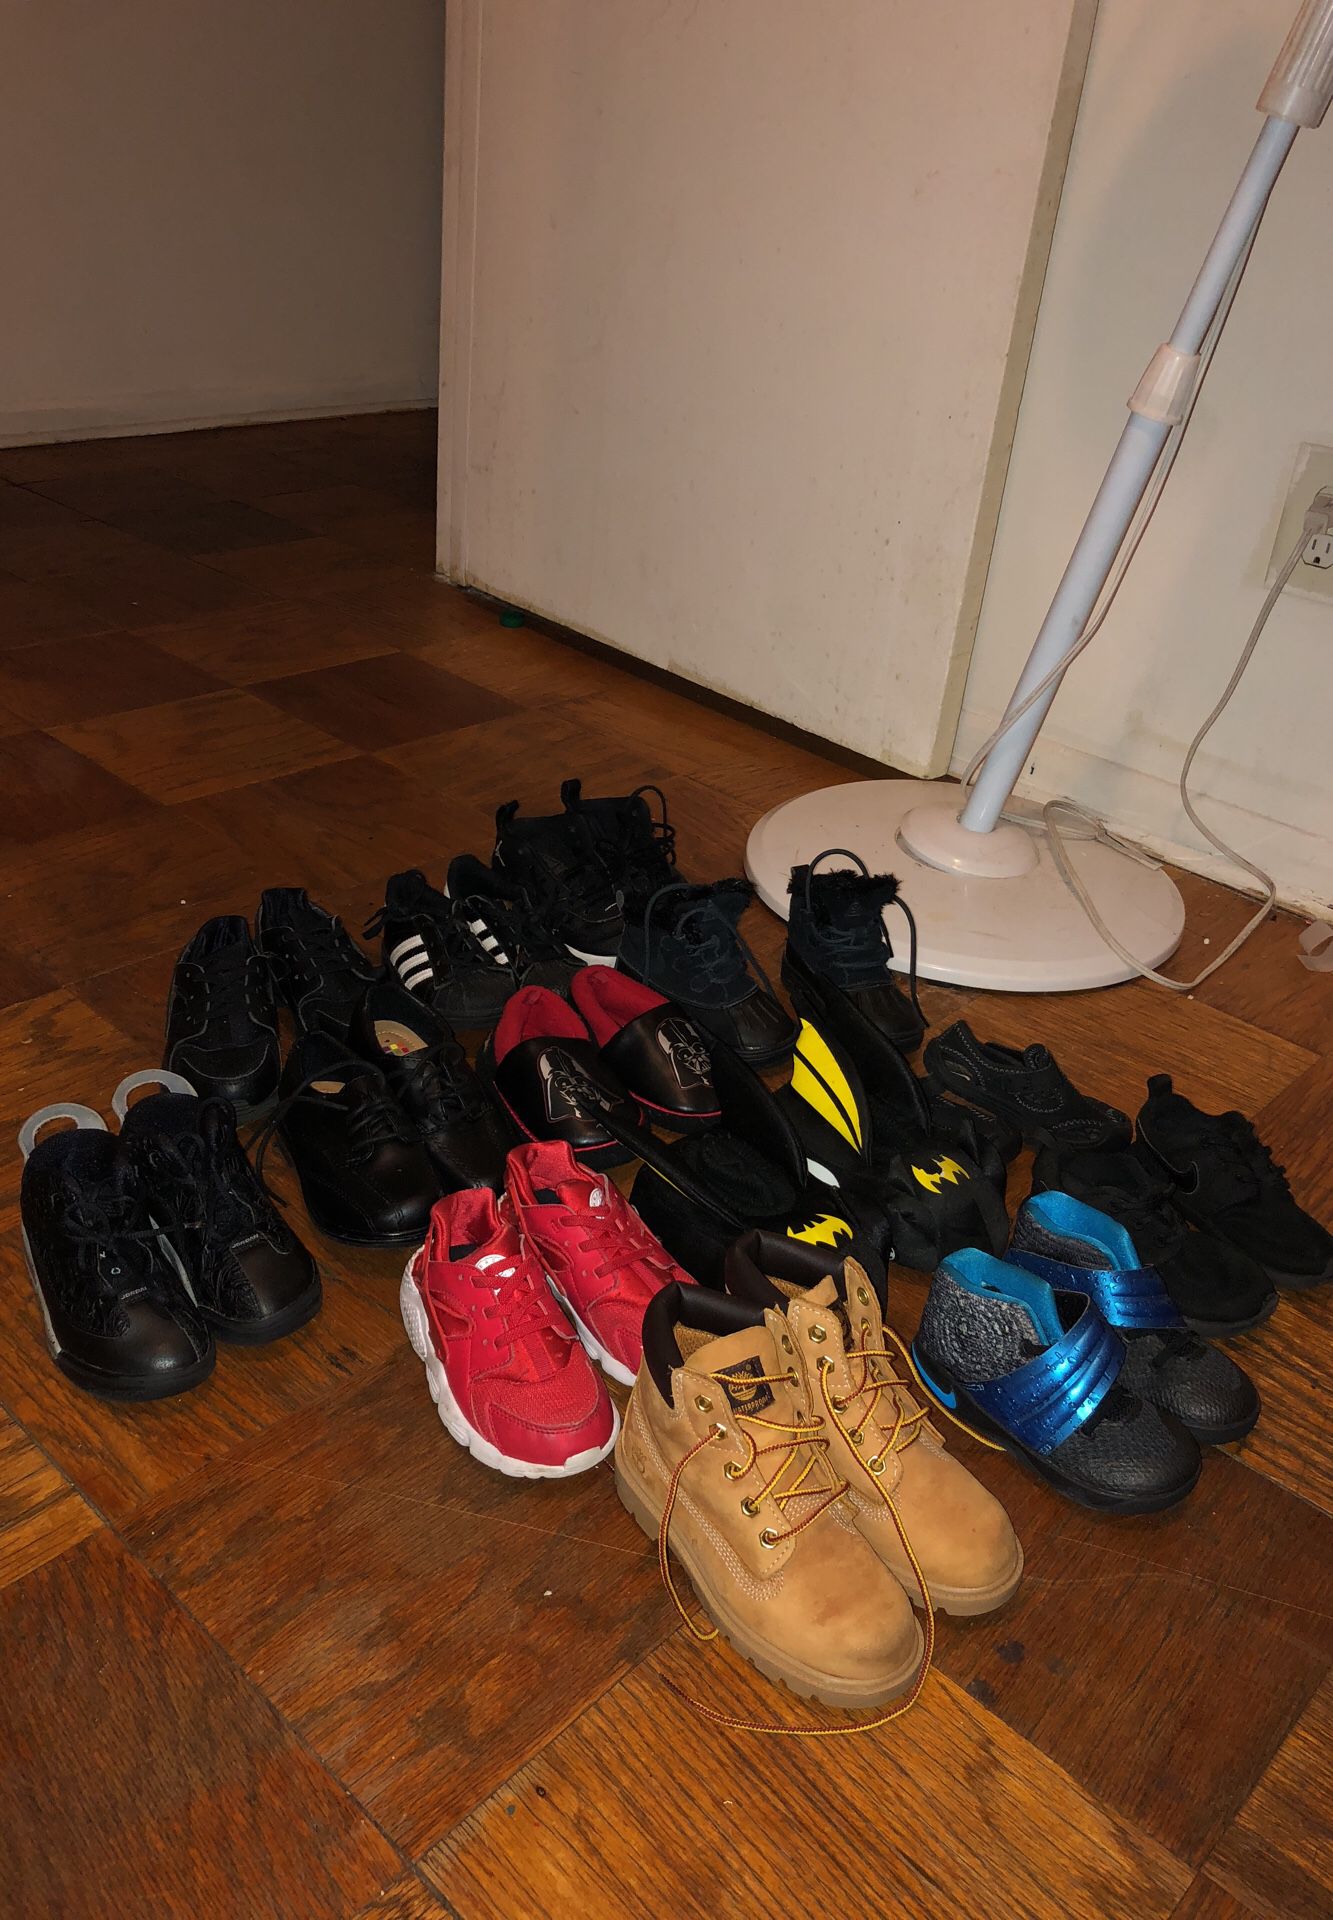 11 Pairs Of Toddler Shoes 2 Pairs Of Boys Slippers. Size 7,8,9,10 30$ each pair